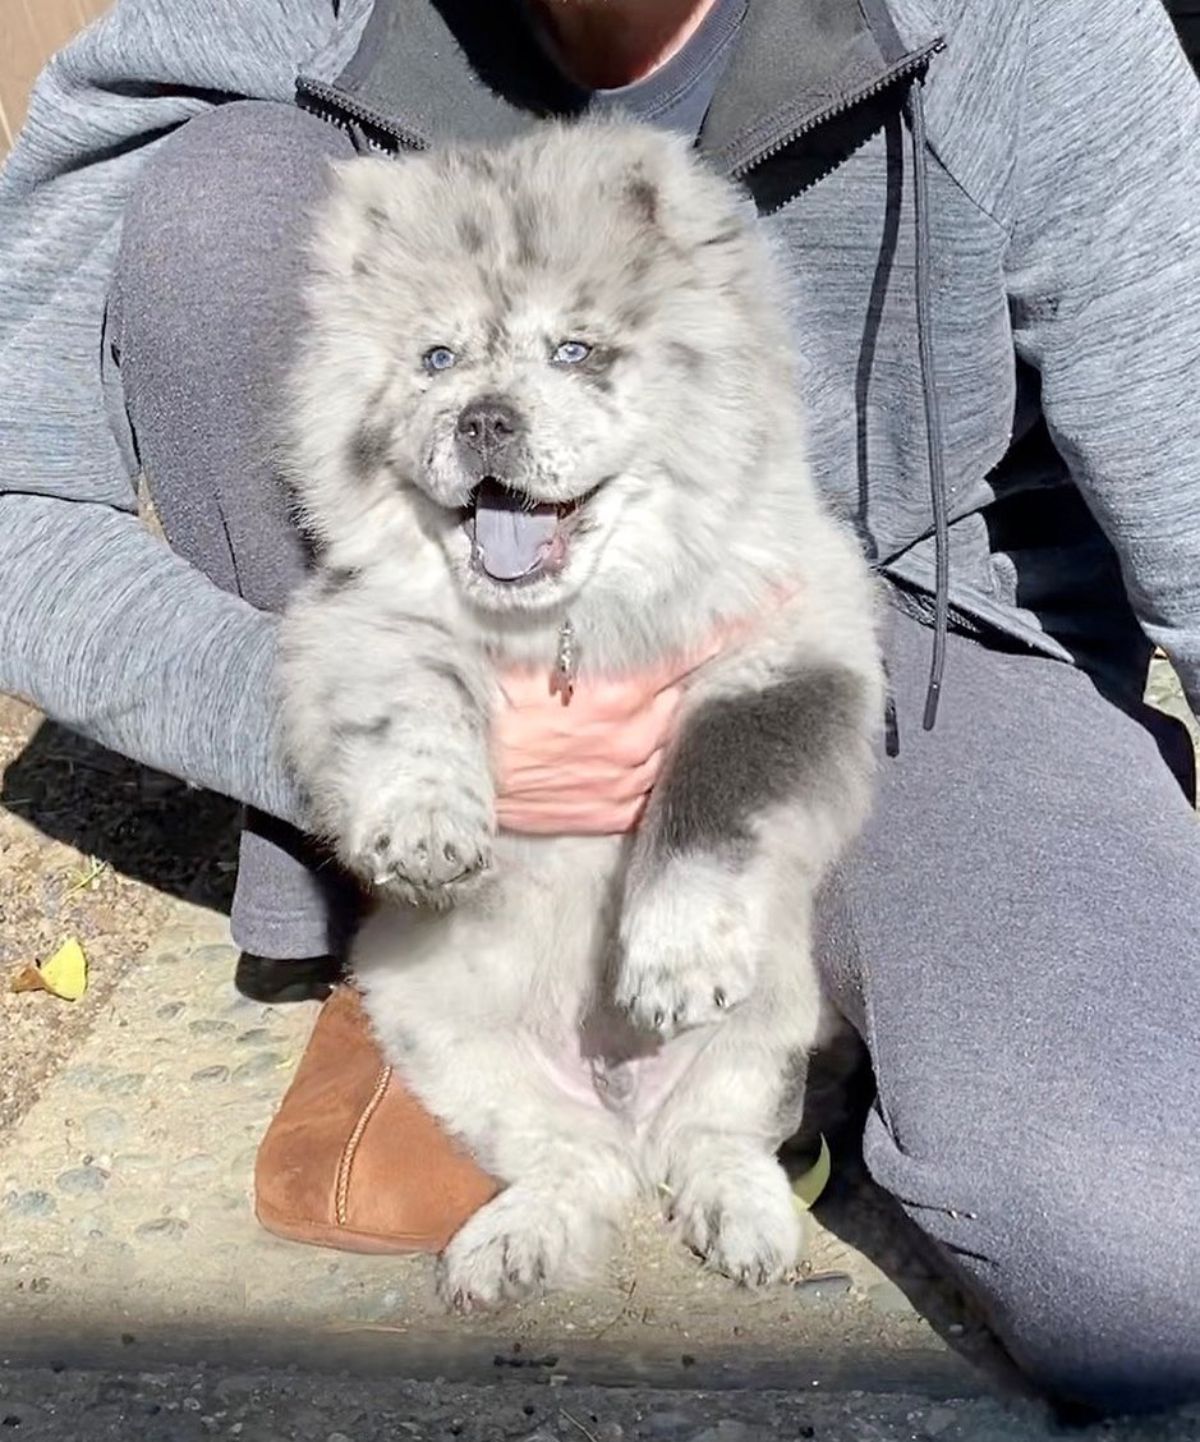 black and white chow chow smiling while being held by someone wearing grey clothes